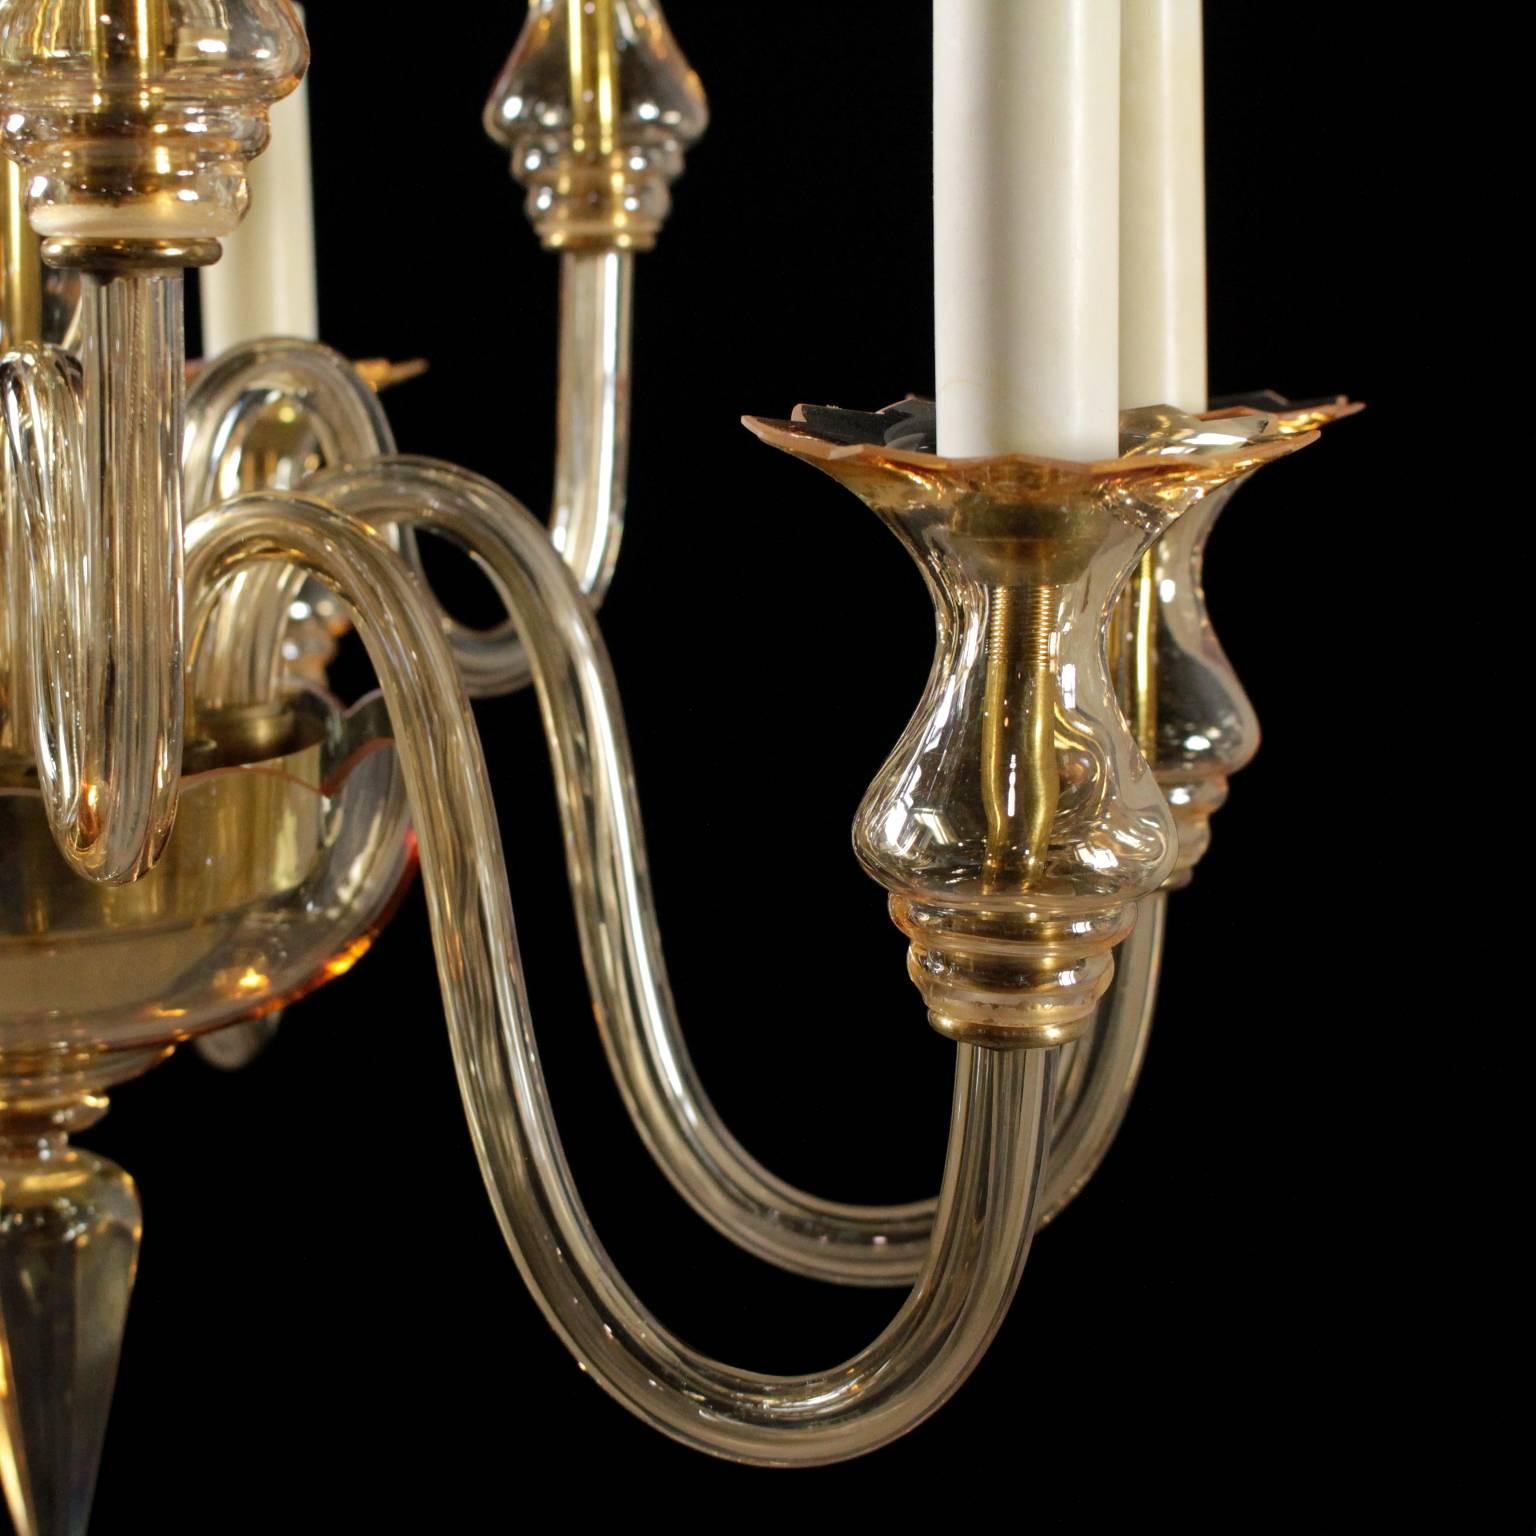 Italian Blown Glass Hanging Lamp Vintage Manufactured in Italy, 1940s-1950s